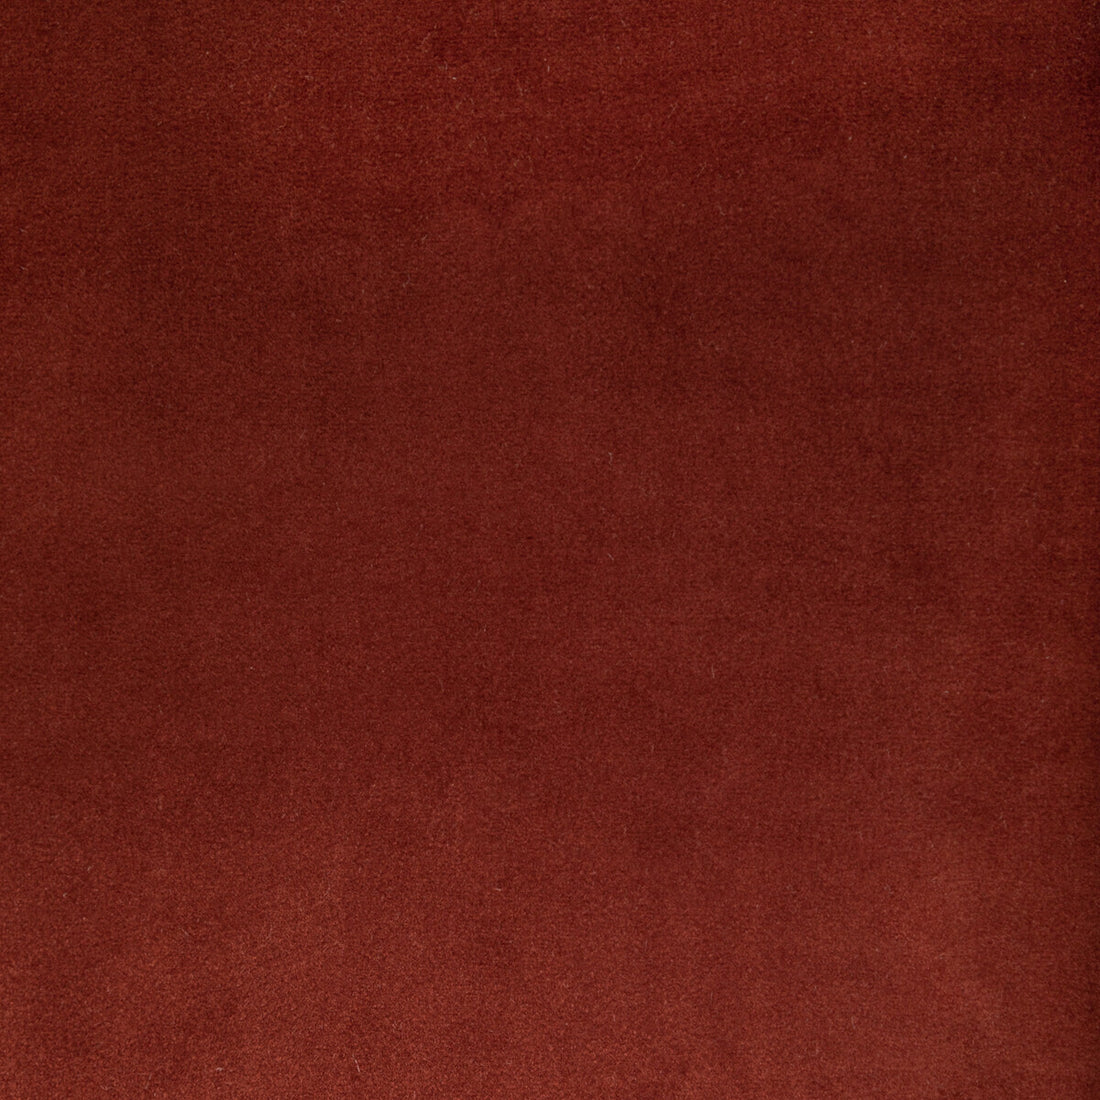 Rocco Velvet fabric in clay color - pattern KW-10065.3685MG46.0 - by Kravet Contract